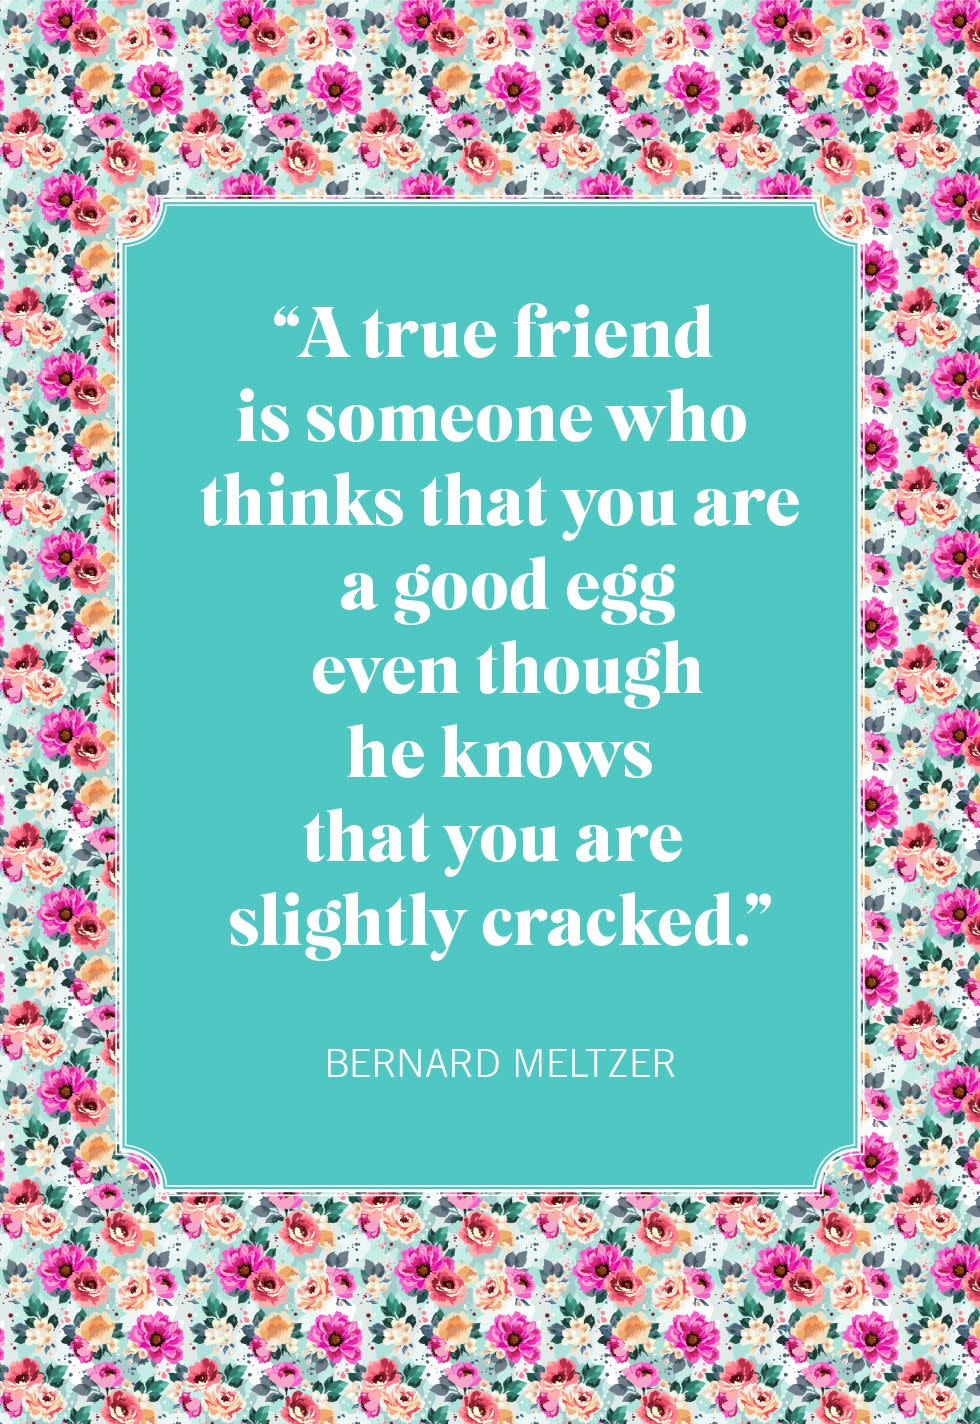 valentines day quotes for friends bernard meltzer